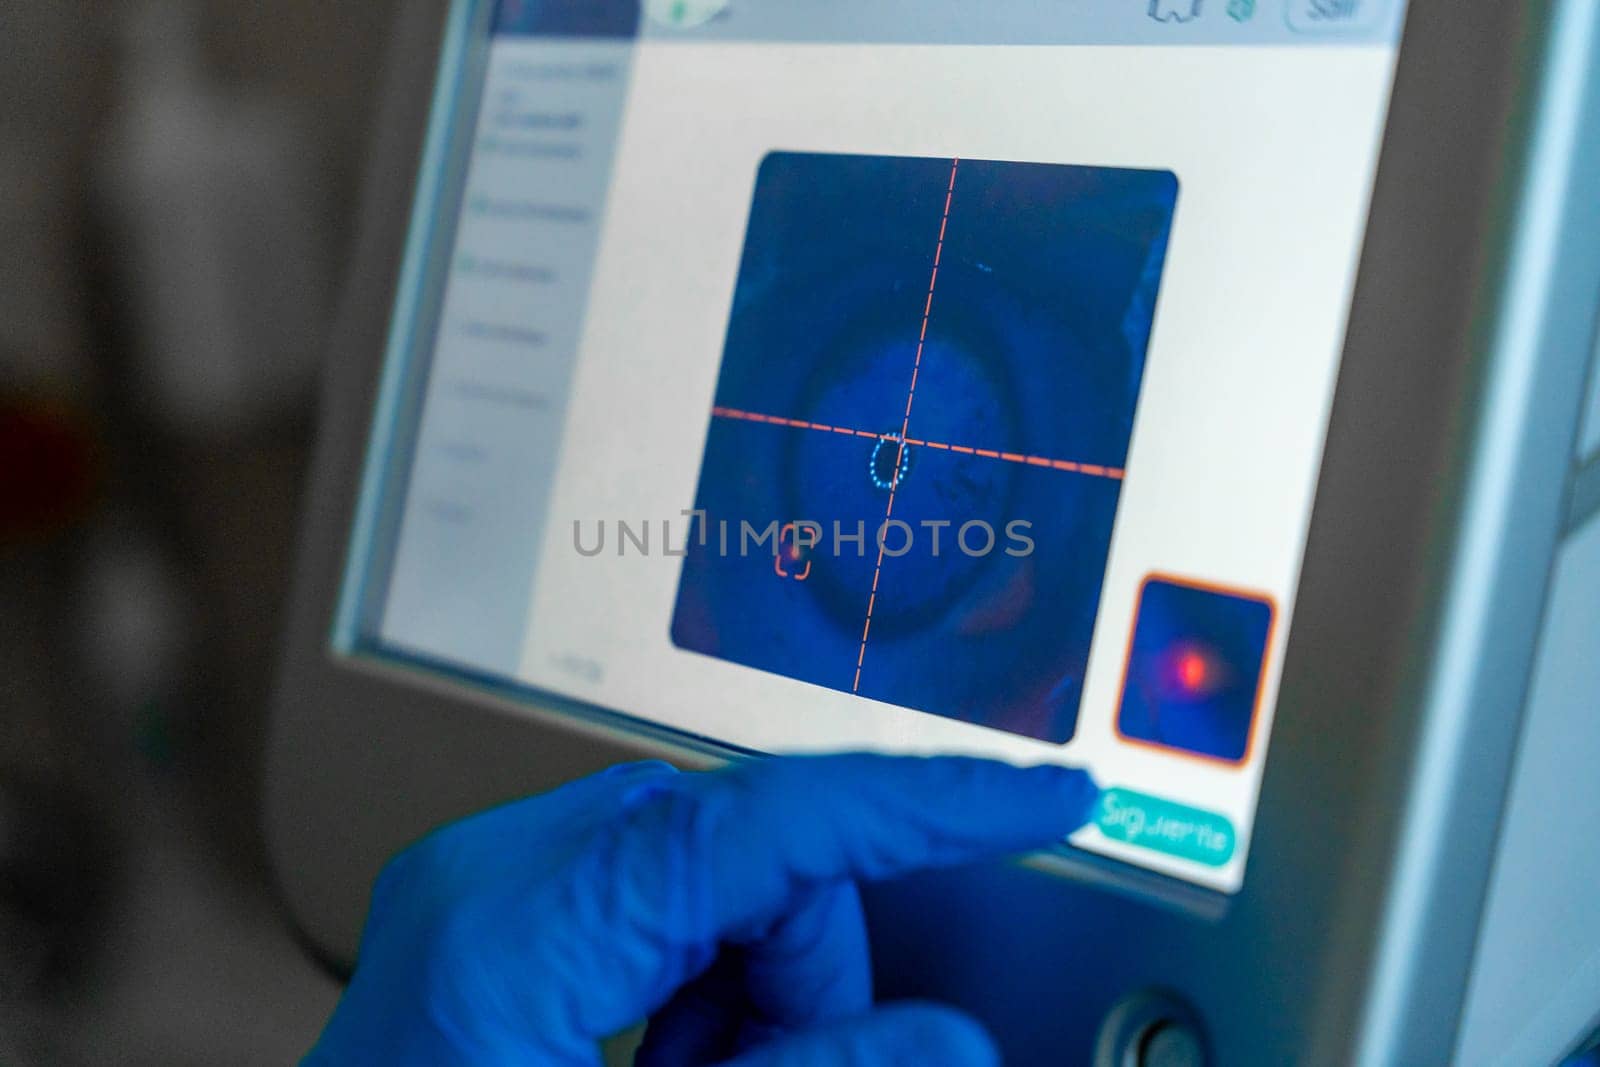 Screen used by the ophthalmologist to monitor the eye for laser application during glaucoma treatment in a patient